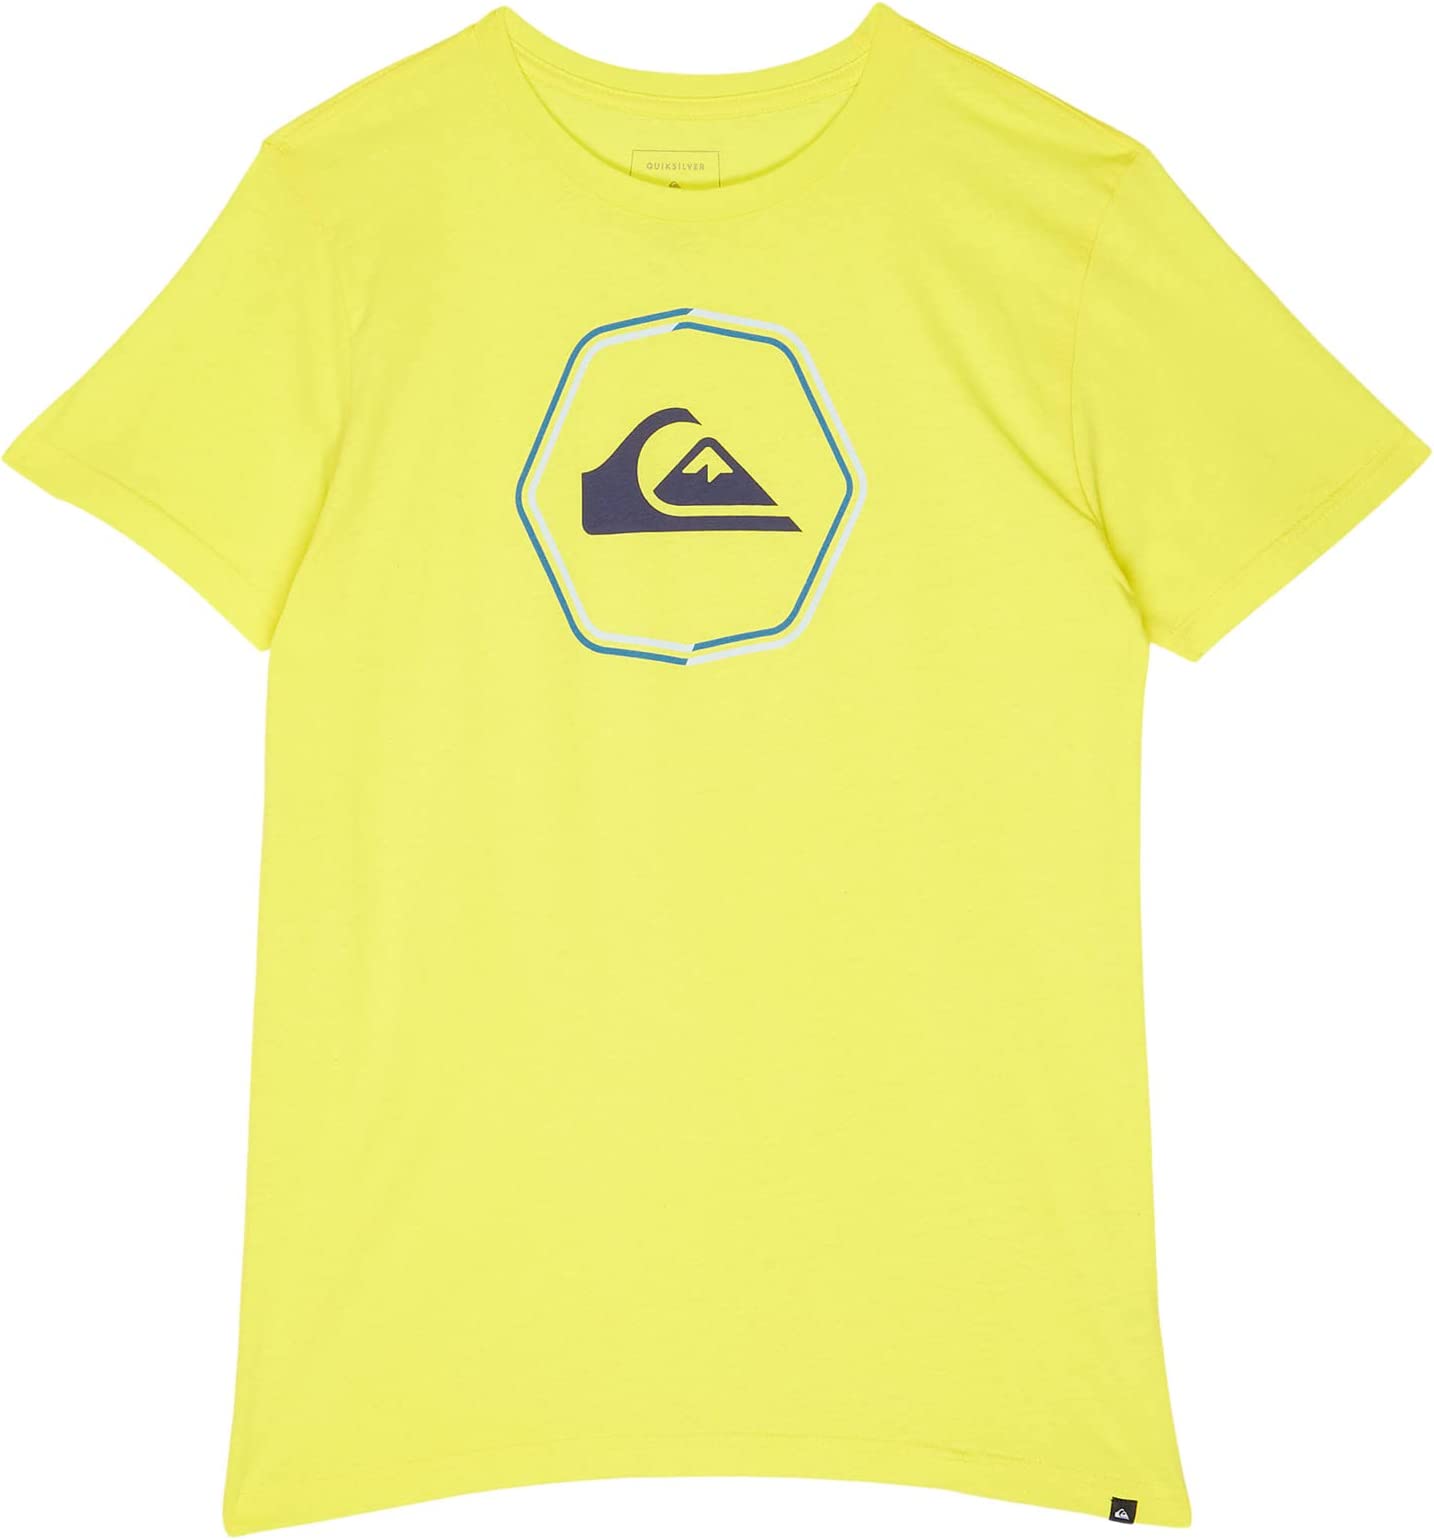 Quiksilver Kids ○ Thin Lines sale on Tee | Delivery Free quiksurfshop.com (Big Kids)